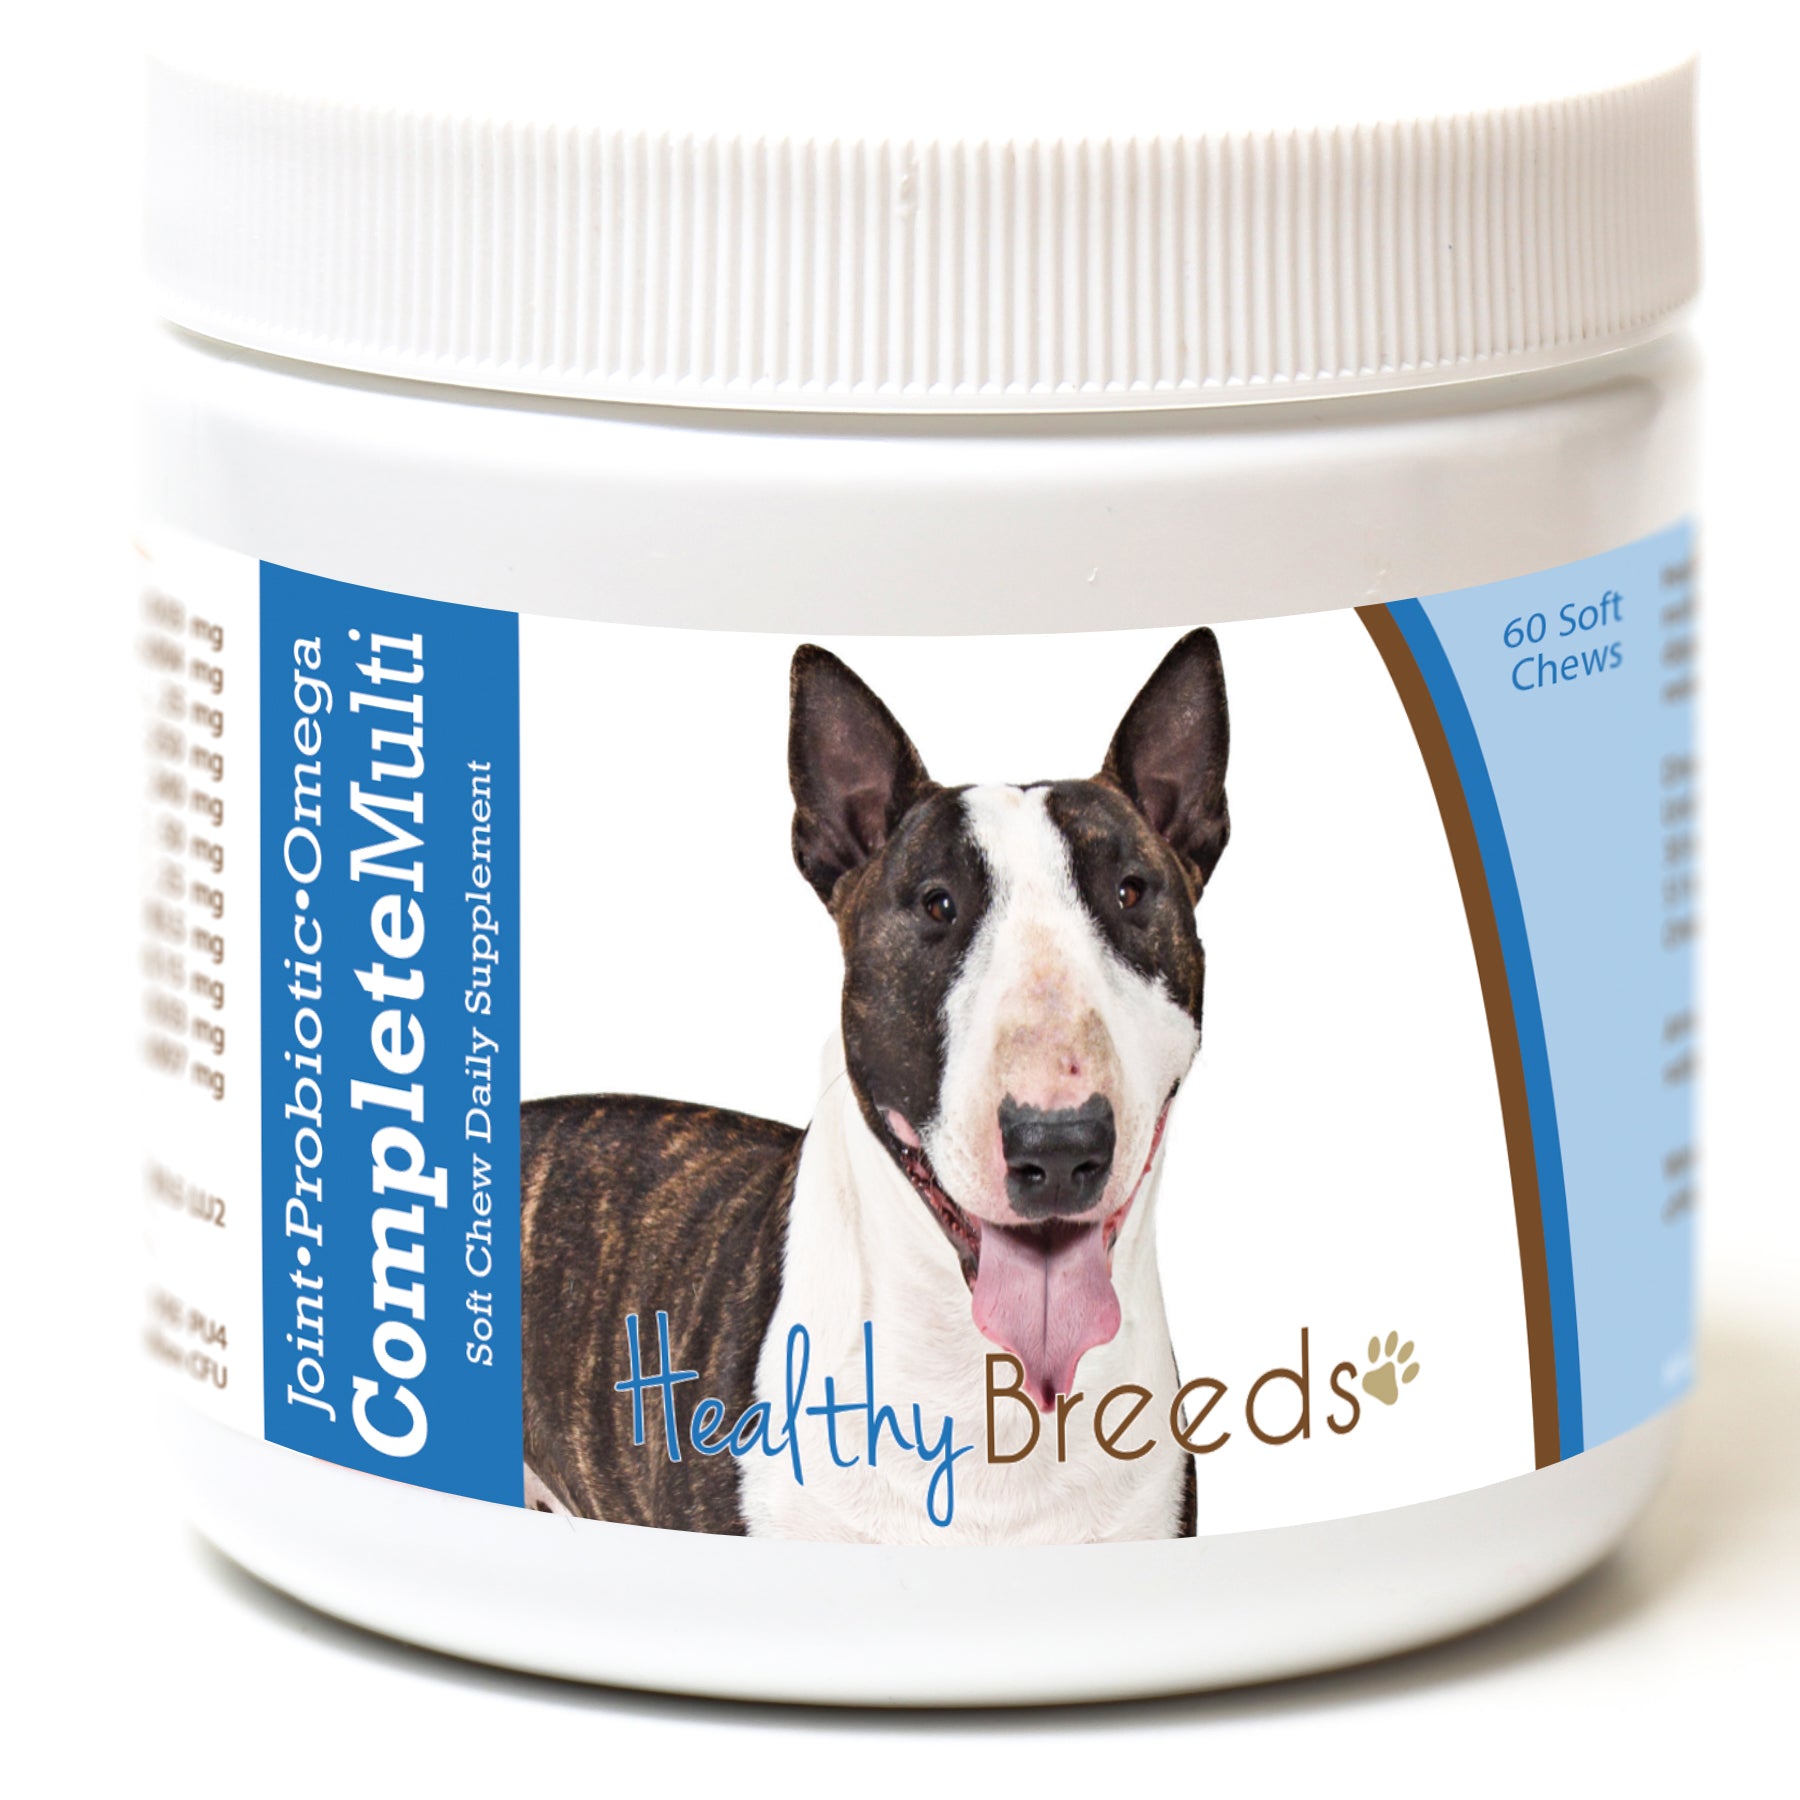 Miniature Bull Terrier All In One Multivitamin Soft Chew 60 Count